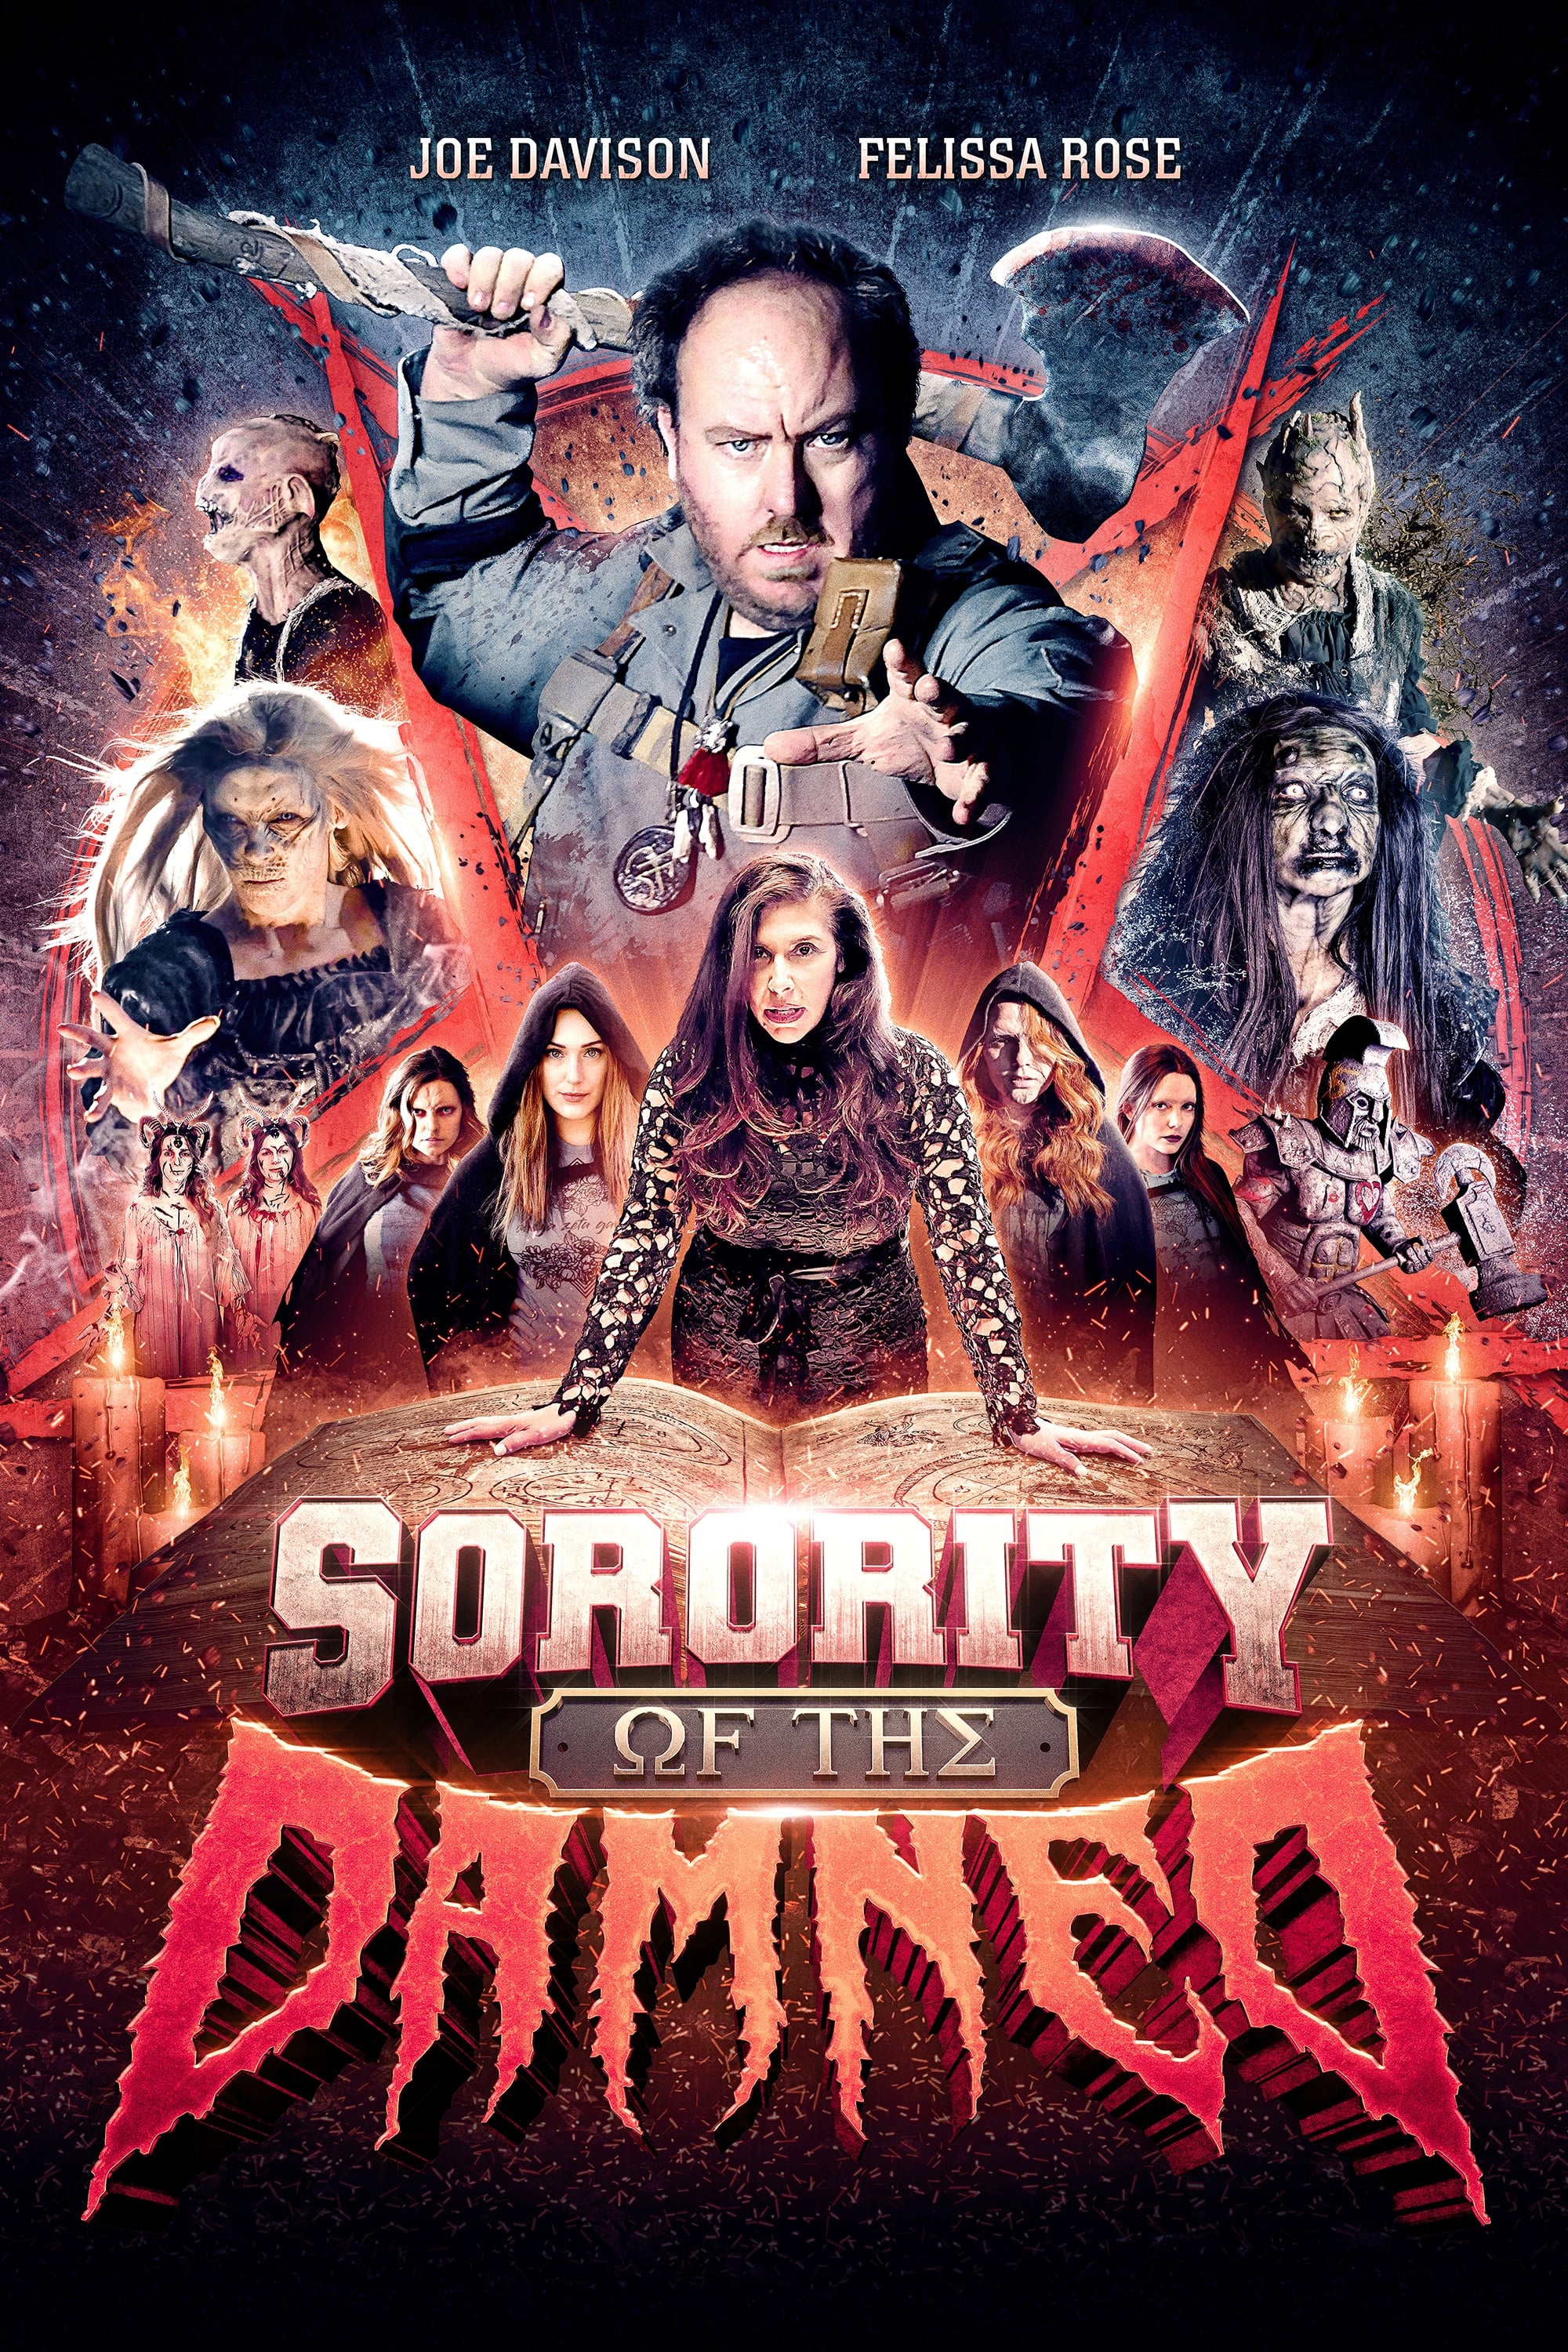 Sorority of the Damned